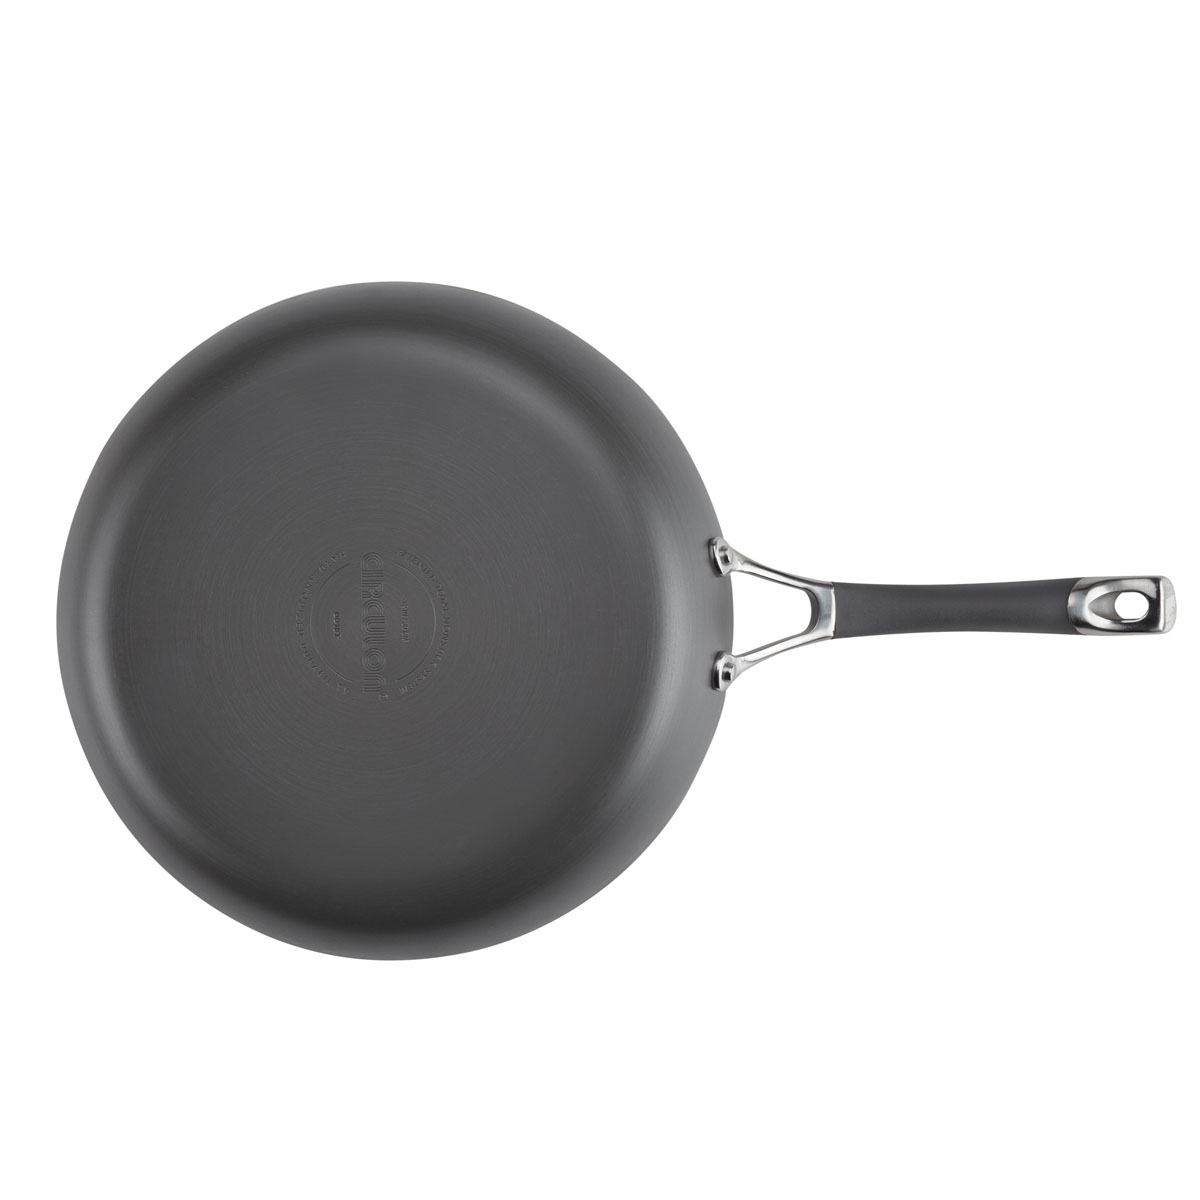 Circulon(R) Radiance 12in. Hard-Anodized Non-Stick Deep Fry Pan